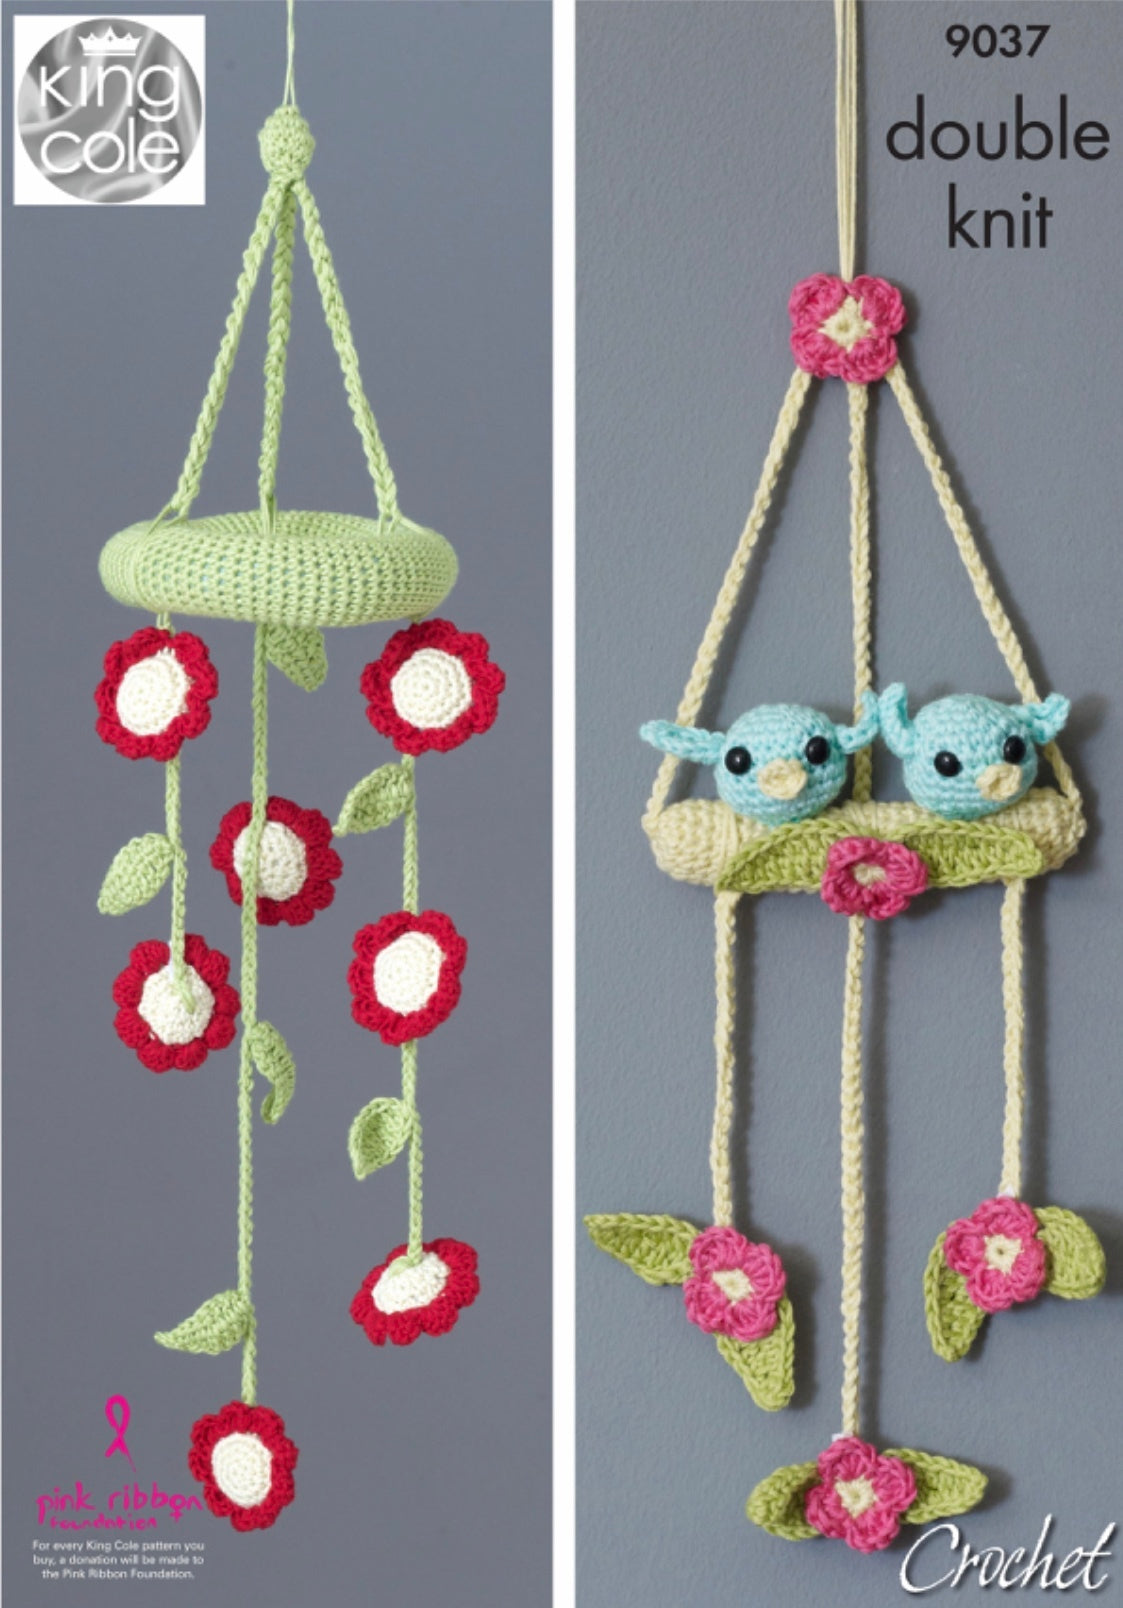 King Cole Pattern 9037 Baby Mobiles in Bamboo Cotton DK